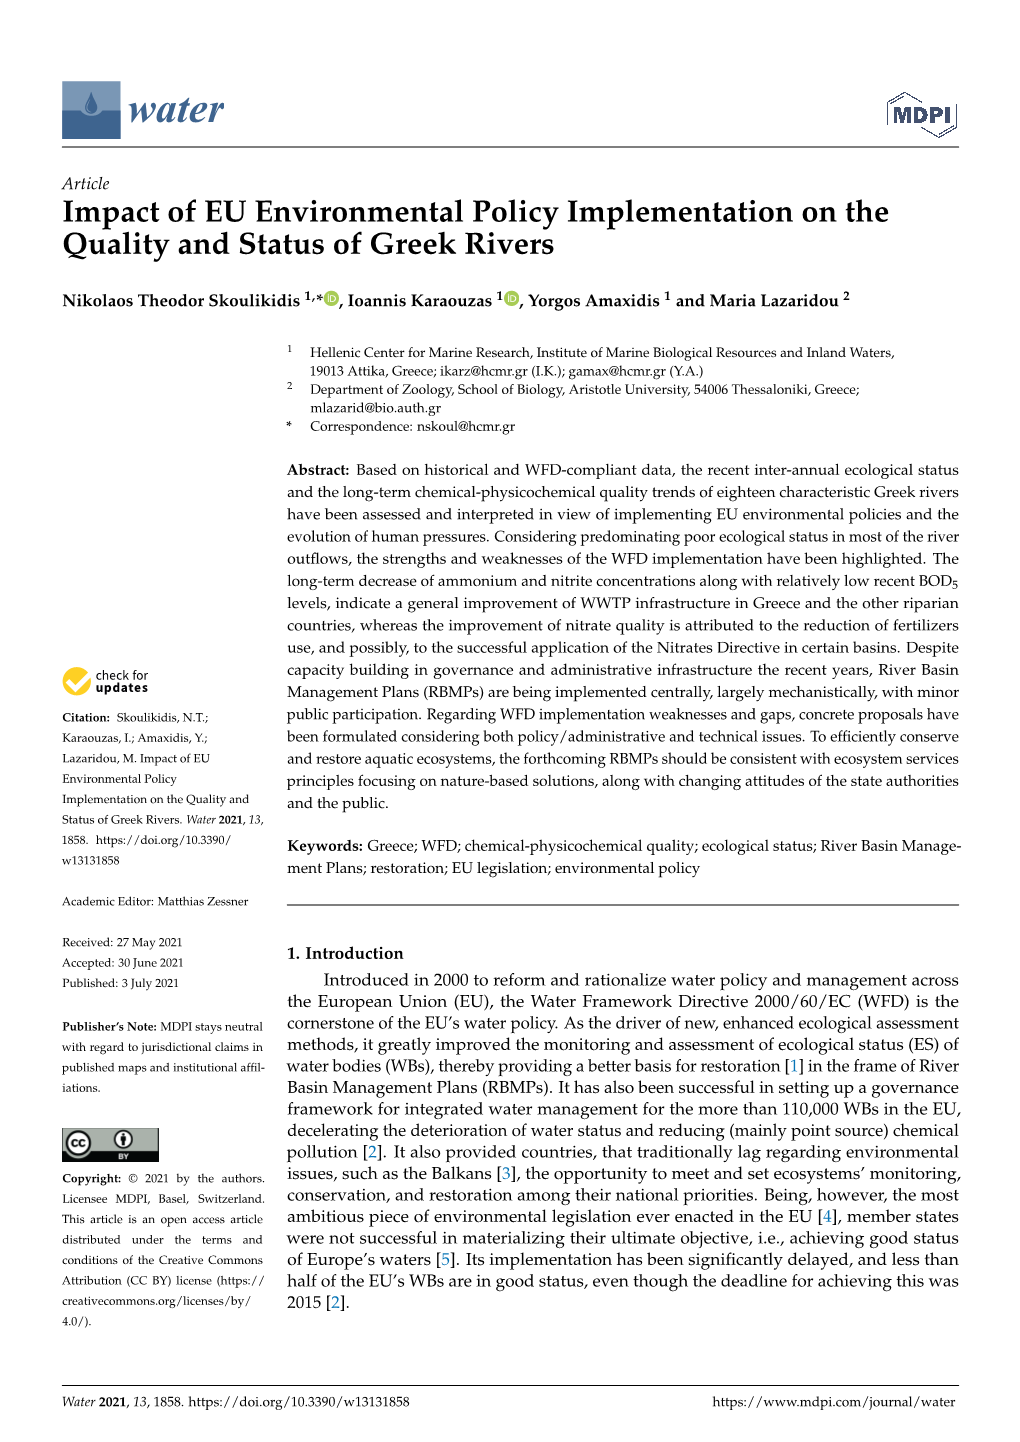 Impact of EU Environmental Policy Implementation on the Quality and Status of Greek Rivers